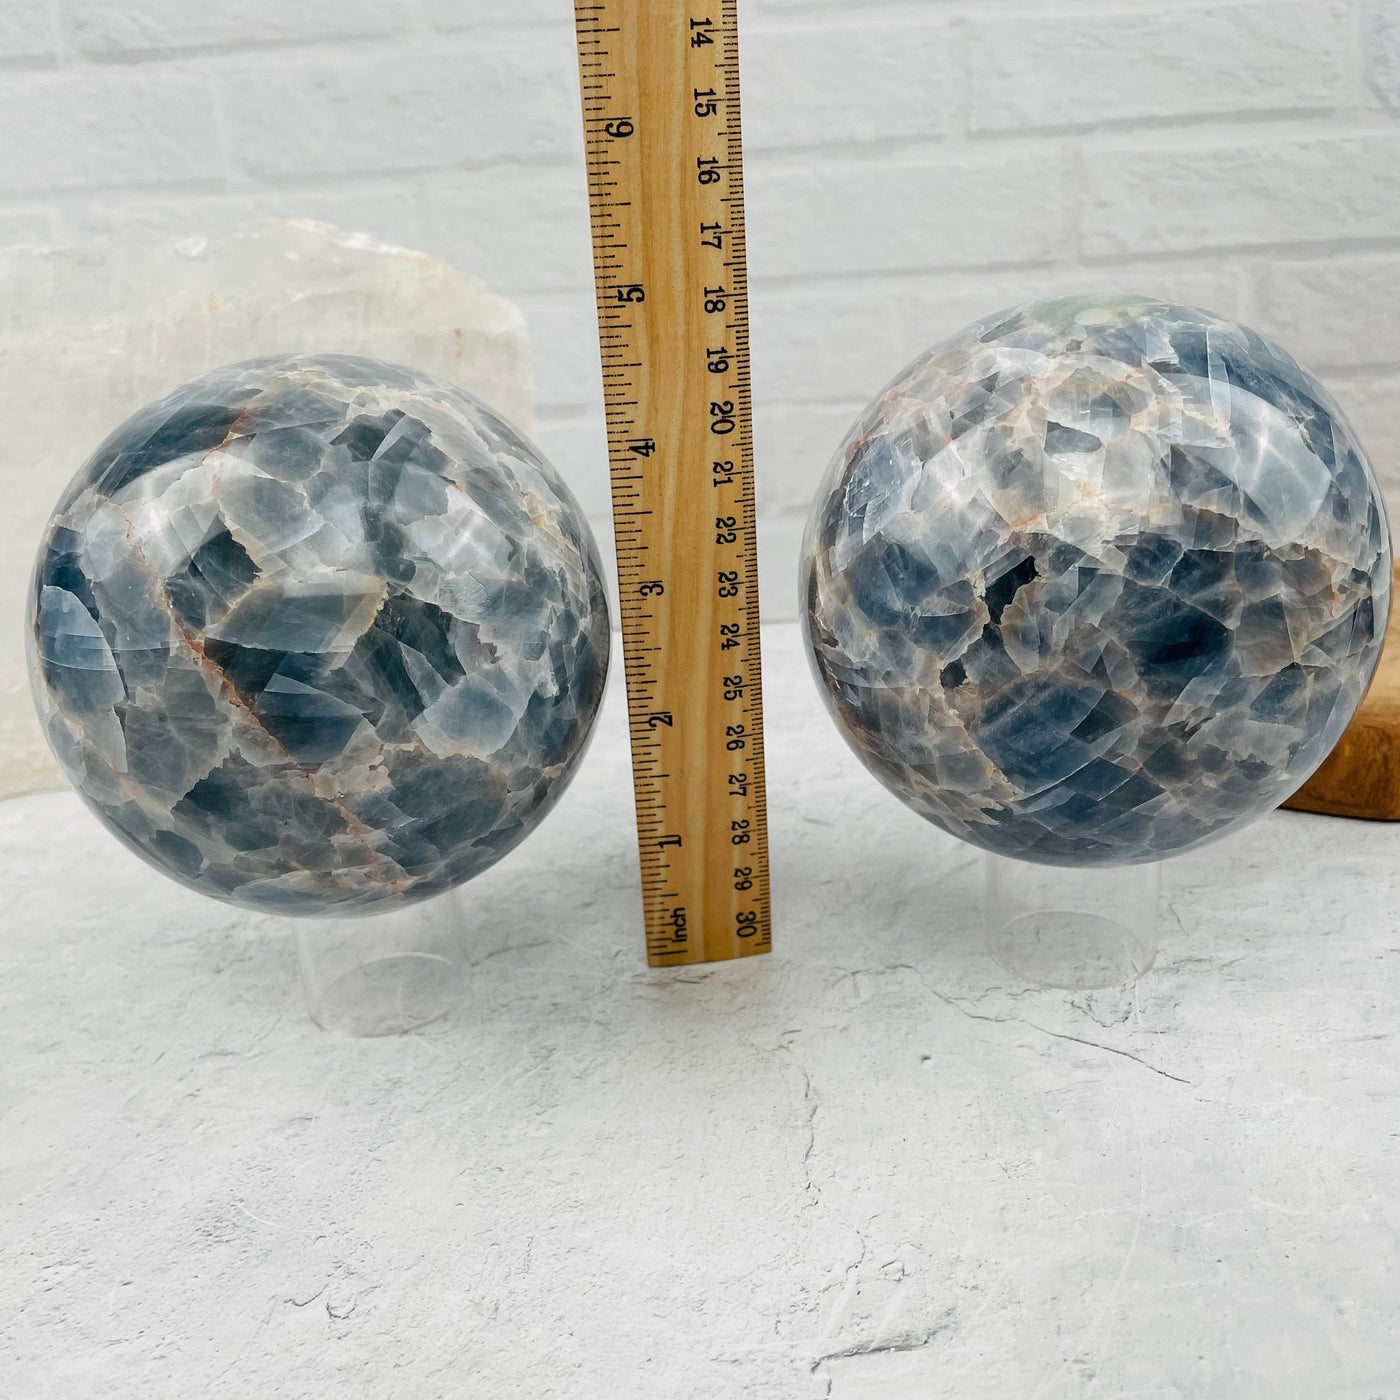 Blue Calcite Polished Spheres - You Choose- with measurements